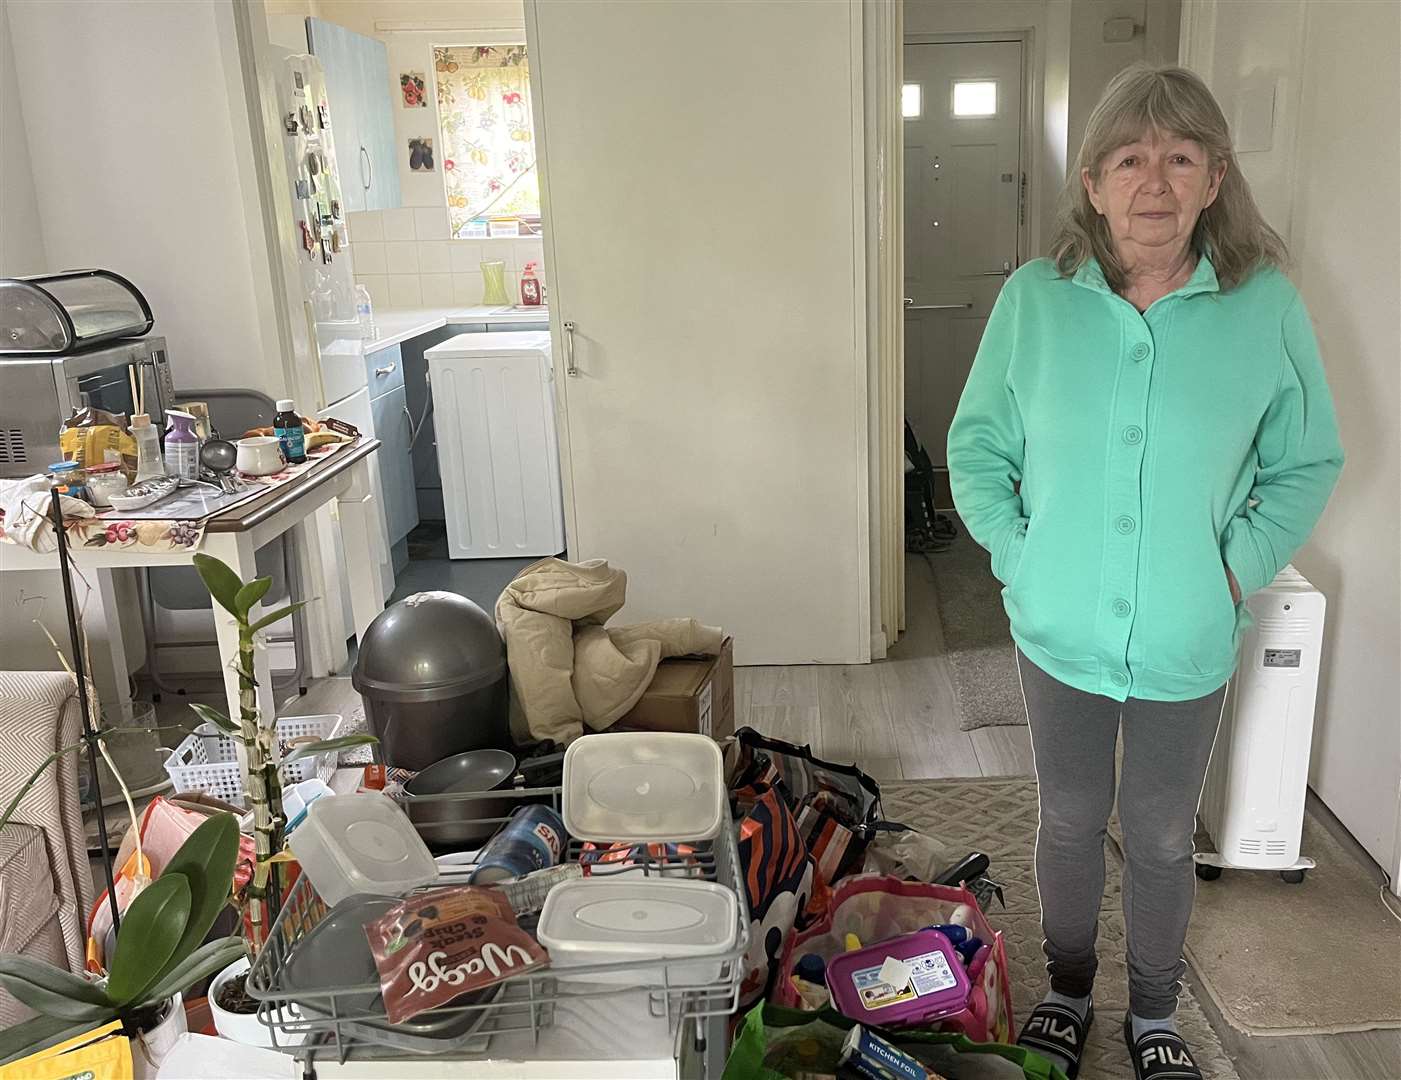 Barbara Hasiuk was told the mouldy kitchen cupboards in her flat would be replaced in February, so she moved their contents into her living room, where they remain three months later